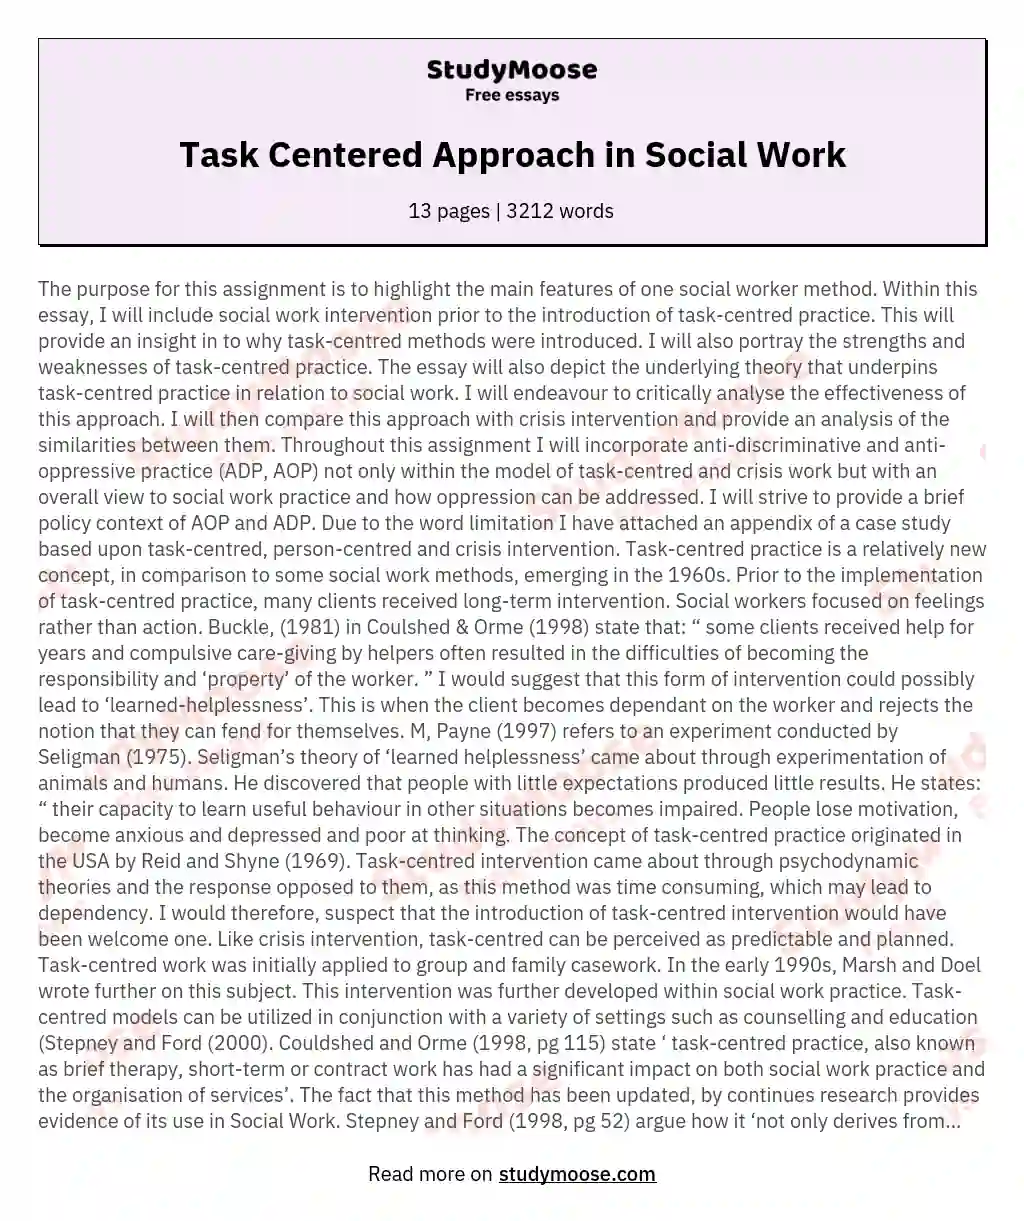 Task Centered Approach in Social Work essay